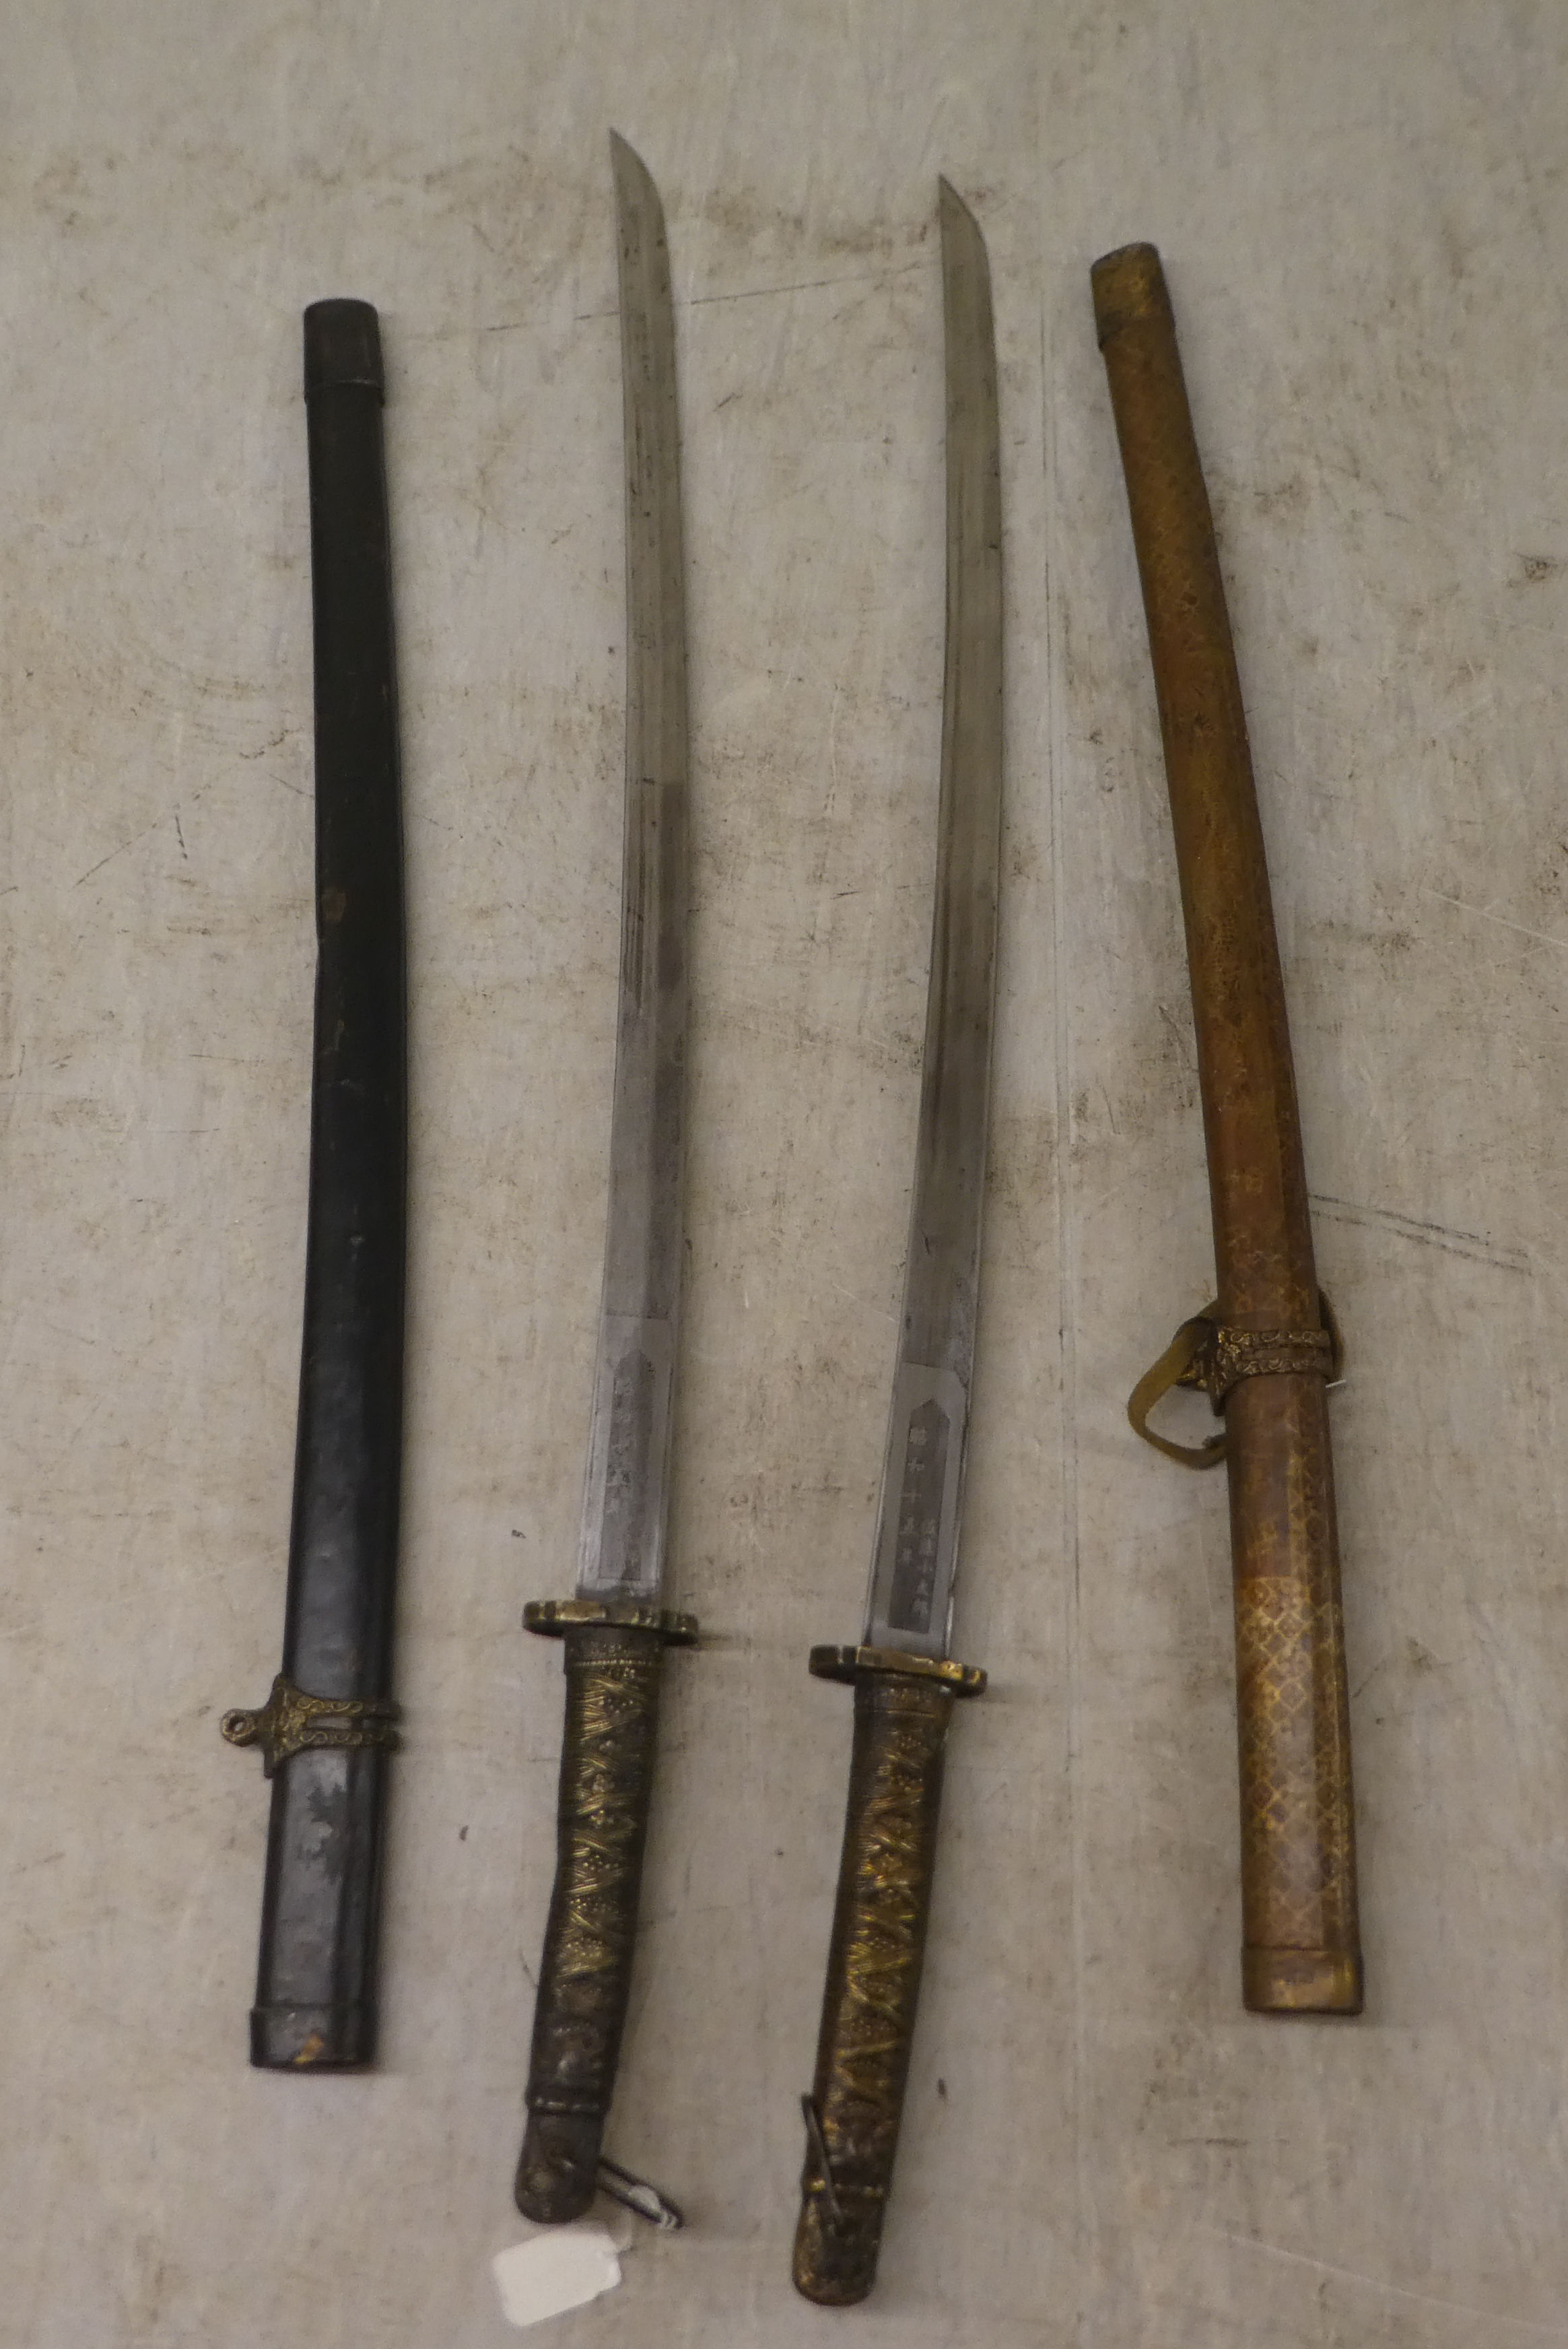 Two similar reproductions of World War II Japanese kutanas, the blades 25"L in lacquered scabbards - Image 5 of 8